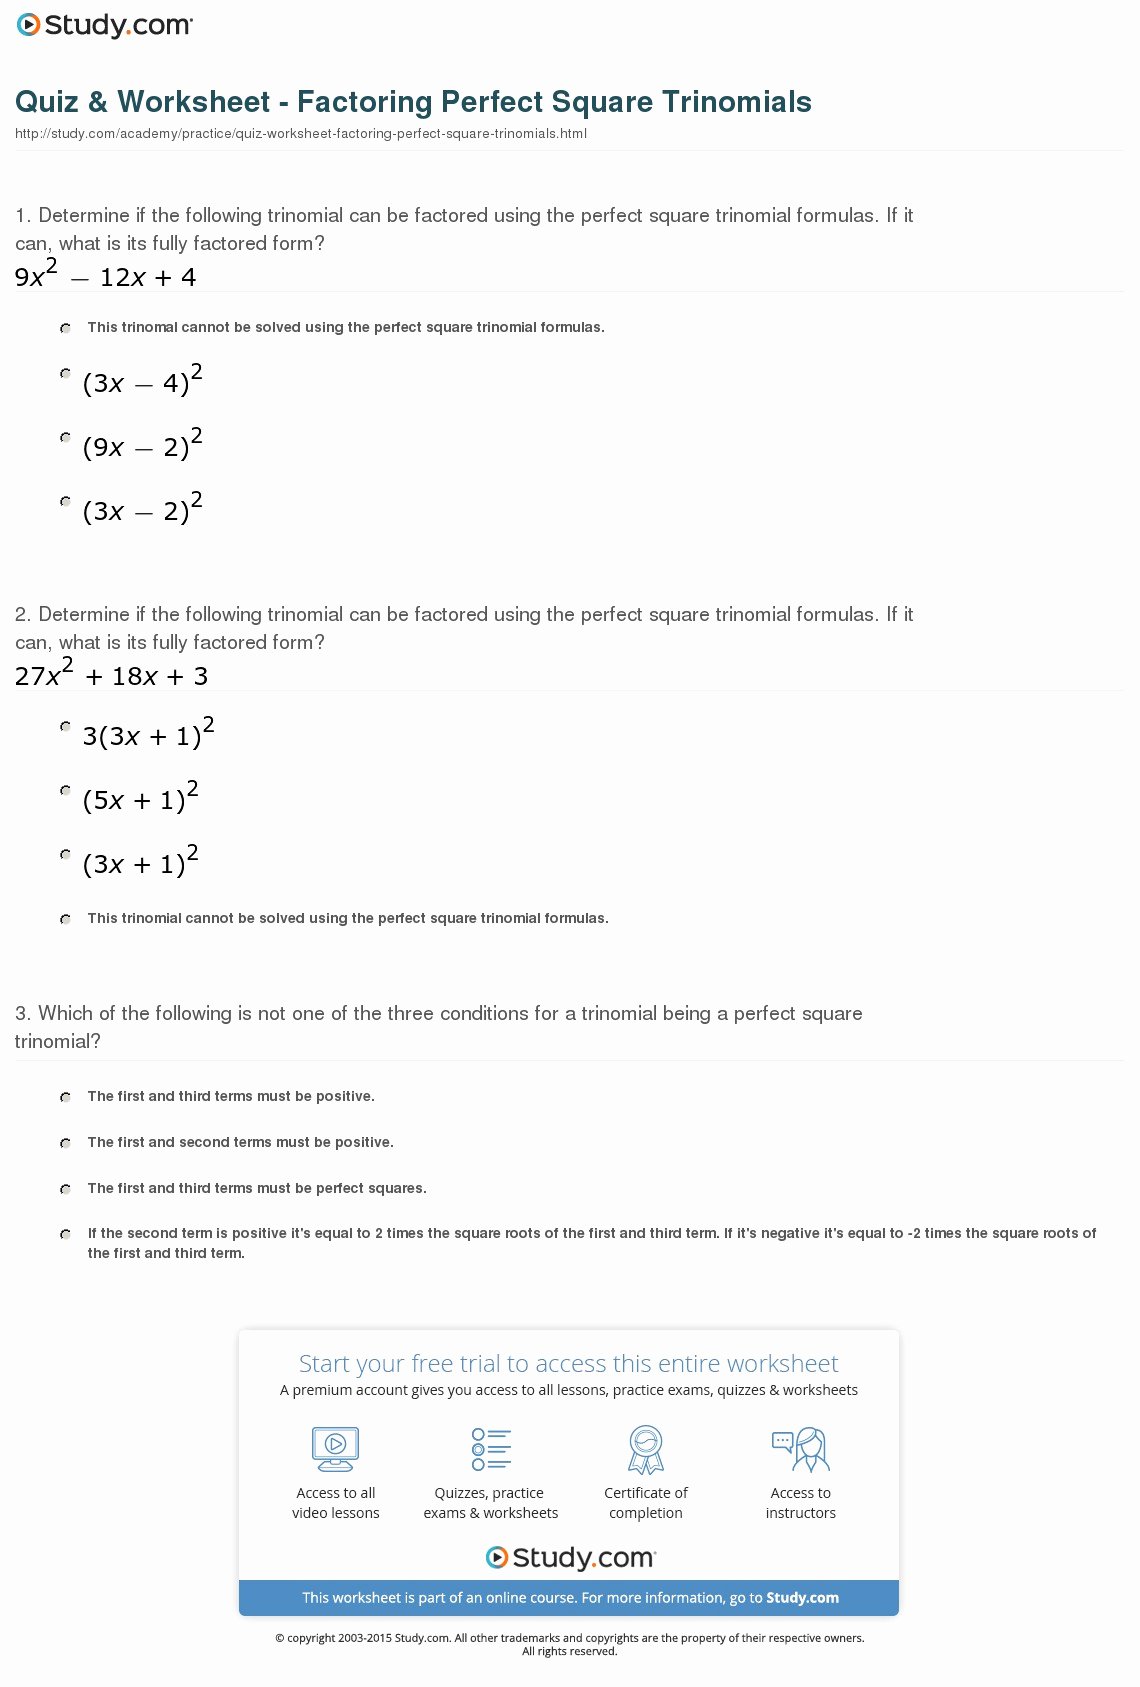 Factoring Practice Worksheet Answers Lovely Quiz &amp; Worksheet Factoring Perfect Square Trinomials